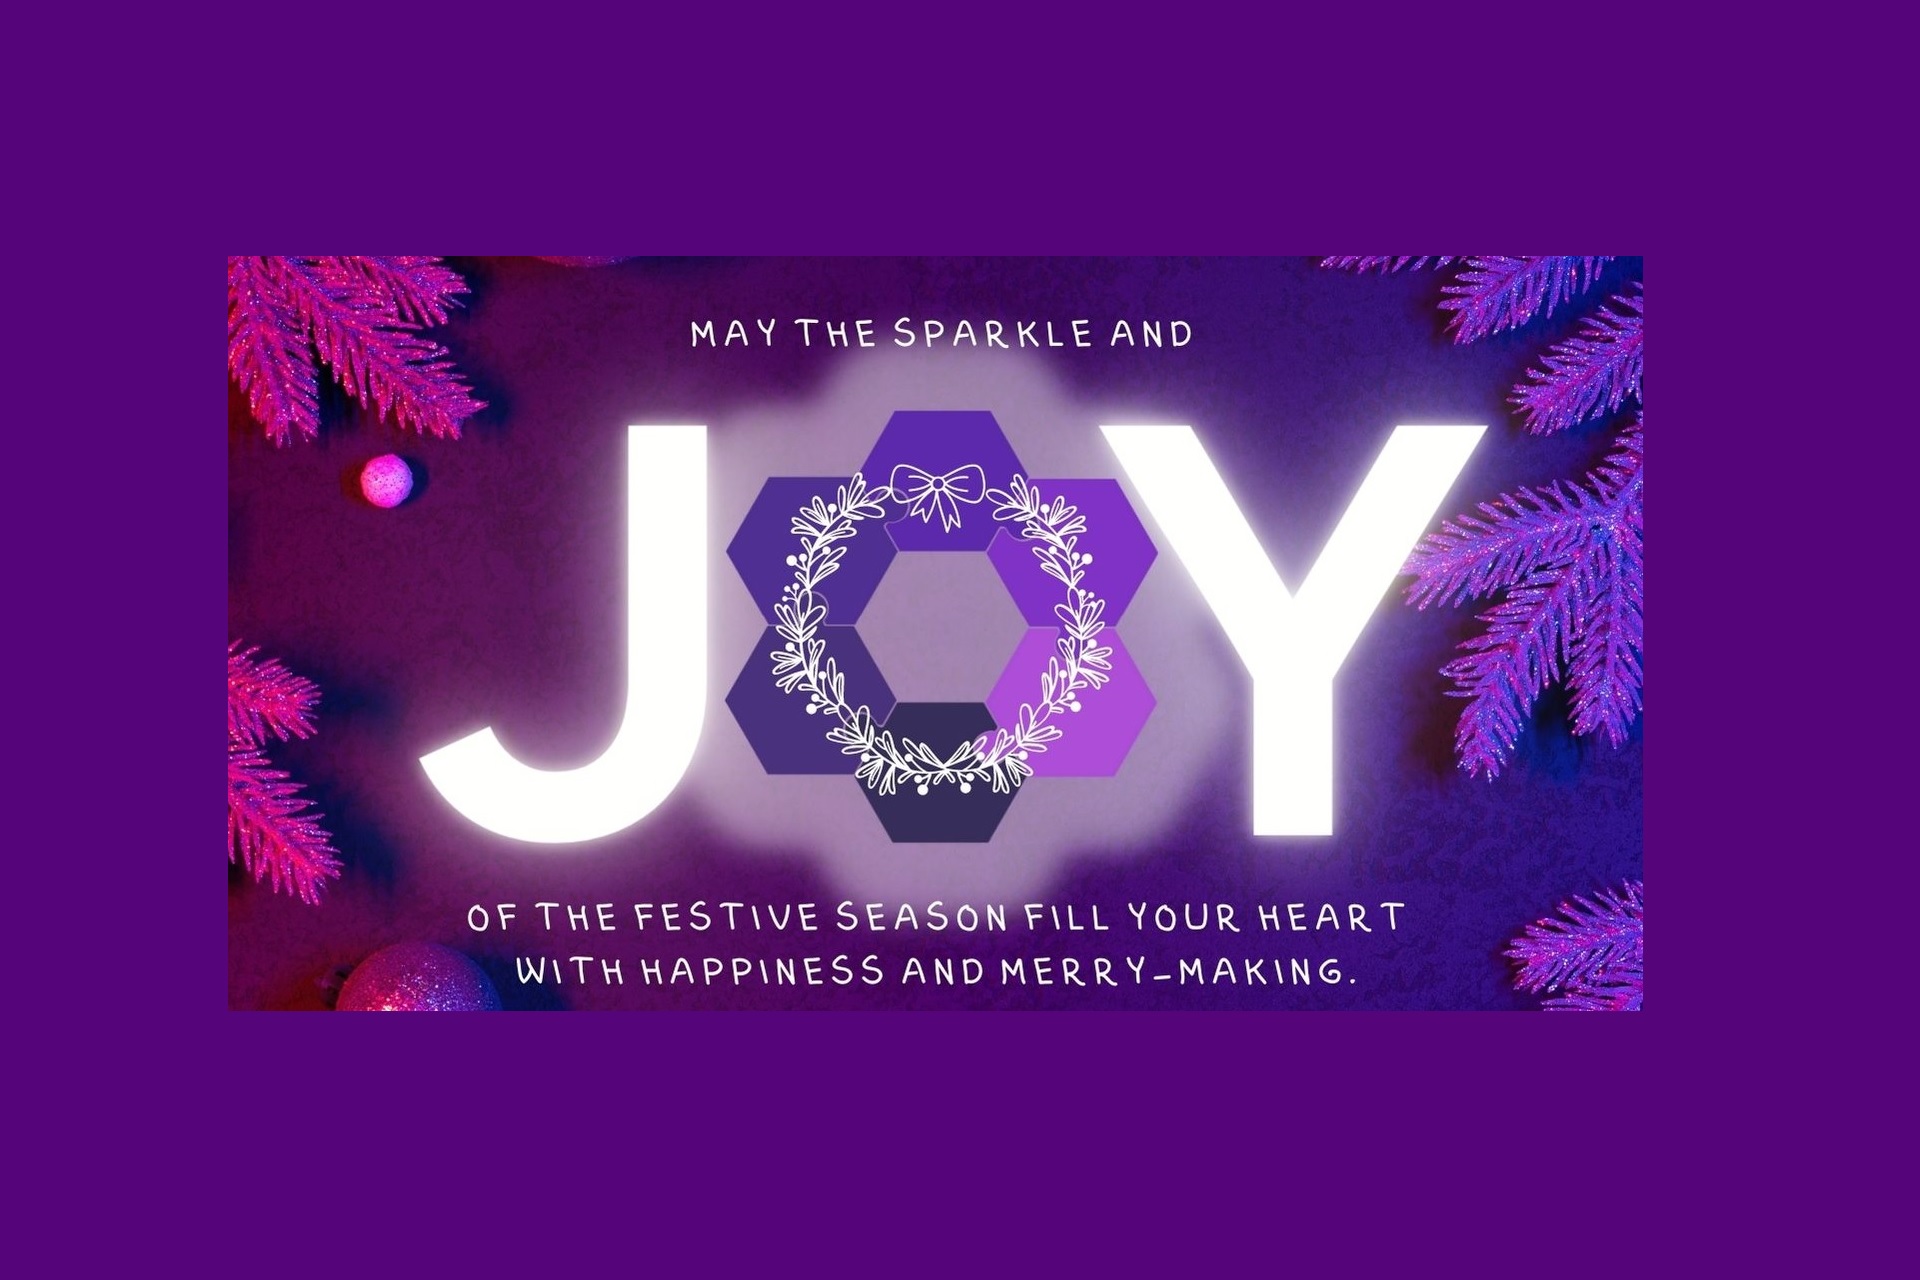 A purple background with baubles and spruce. The message reads May the sparkles and joy of the festive season fill your heart with happiness and merry-making. The word JOY is large and the letter O is made from the Co-POWeR circular logo with a wreath graphic on.